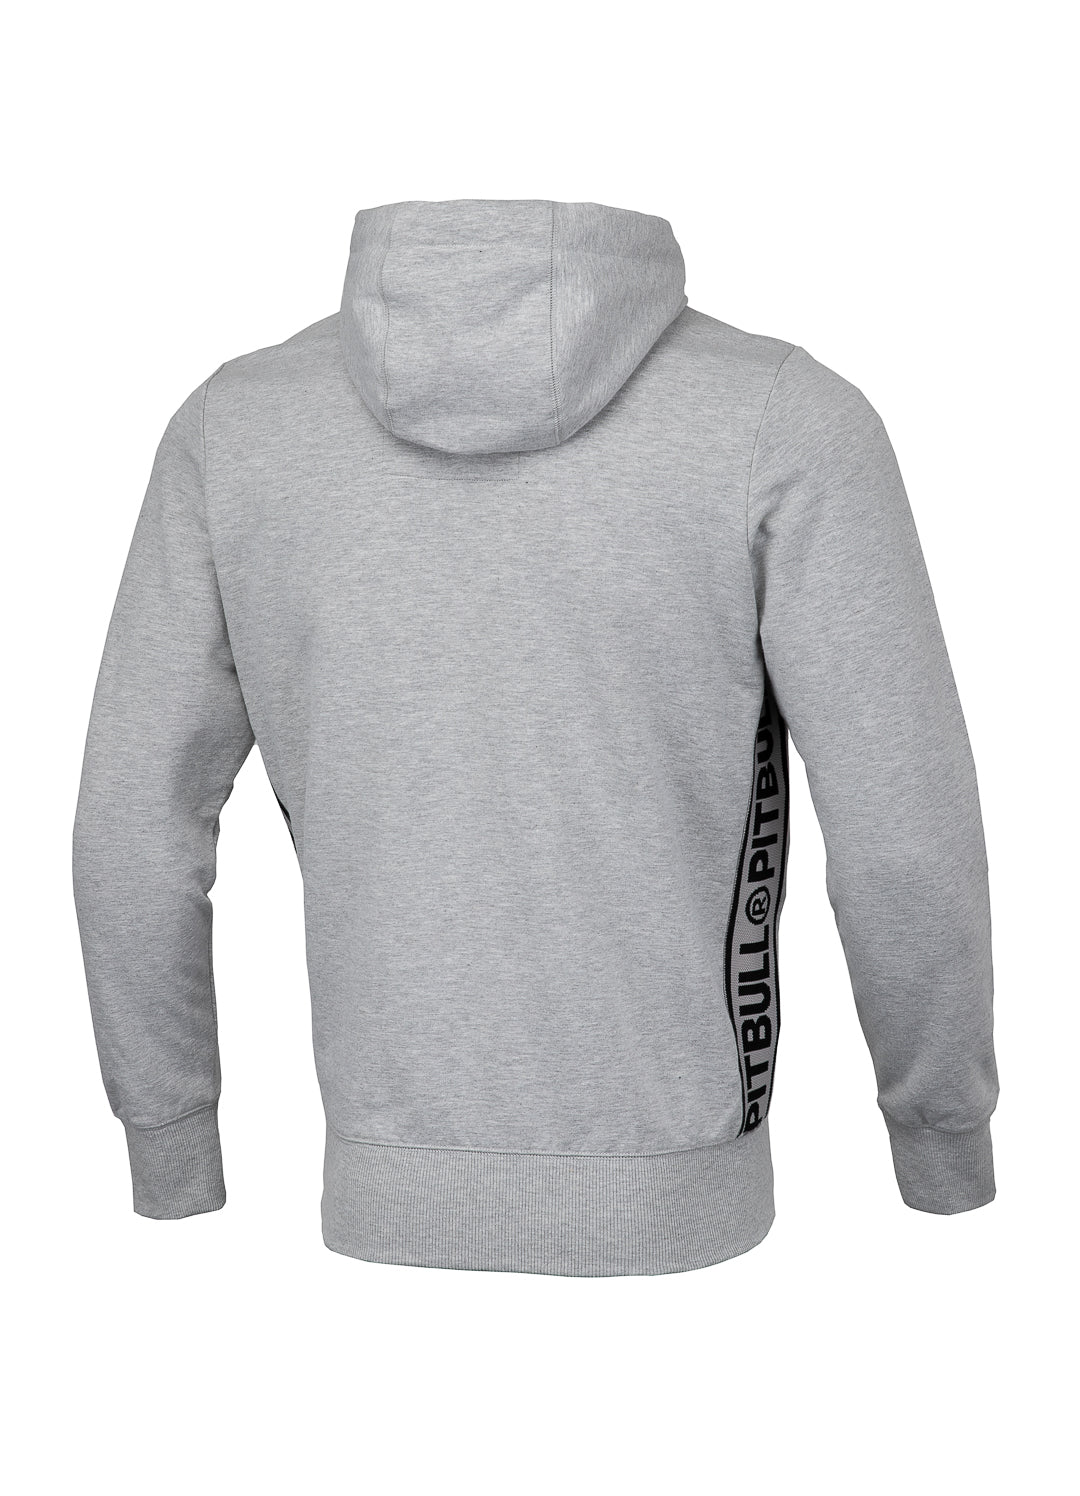 OLYMPIC French Terry Grey Hoodie